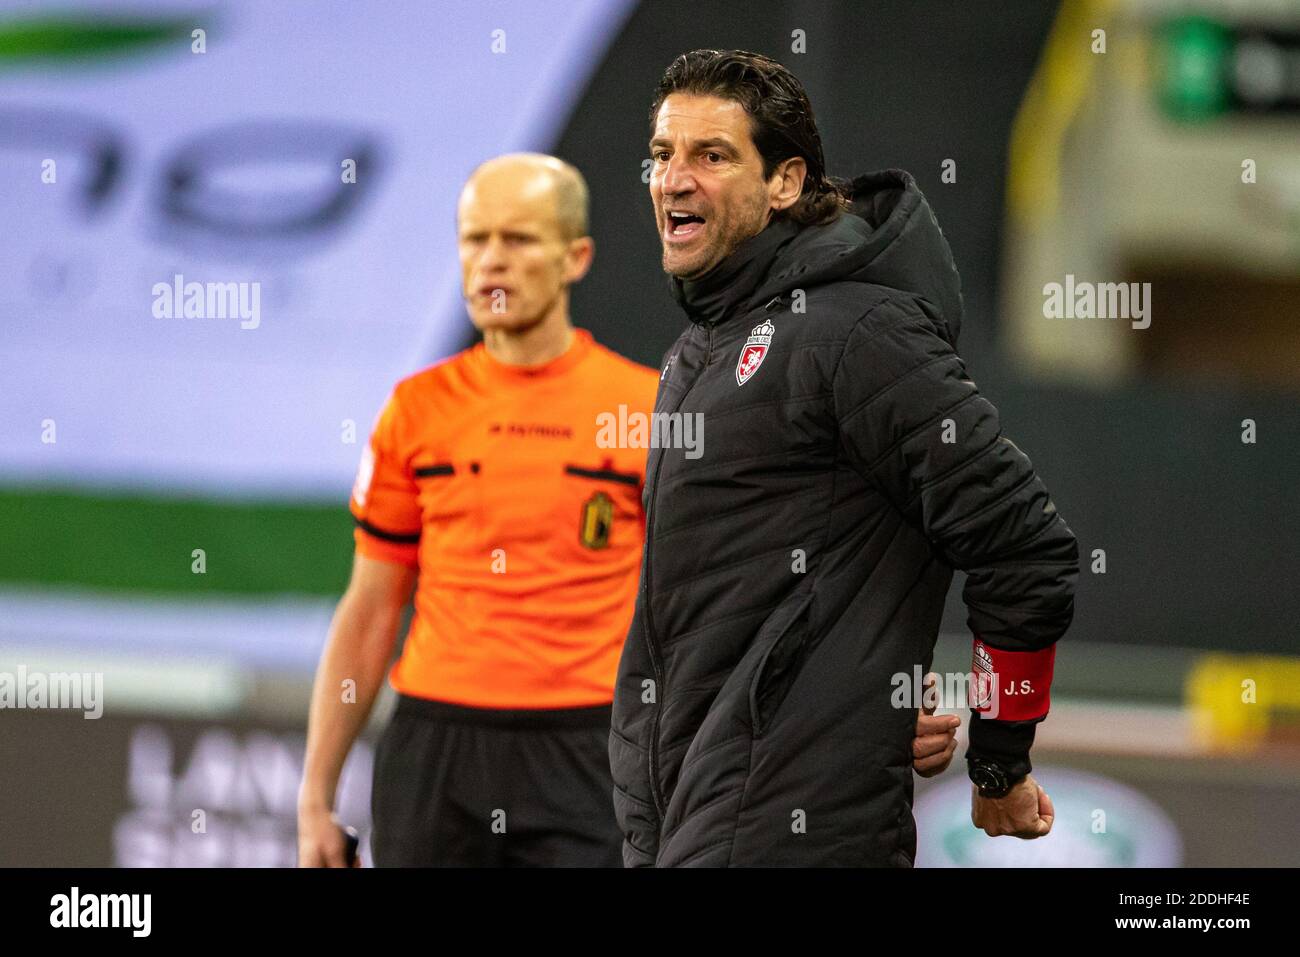 Mouscron's head coach Jorge Simao pictured during a postponed soccer match between Cercle Brugge KSV and RE Mouscron, Wednesday 25 November 2020 in Br Stock Photo